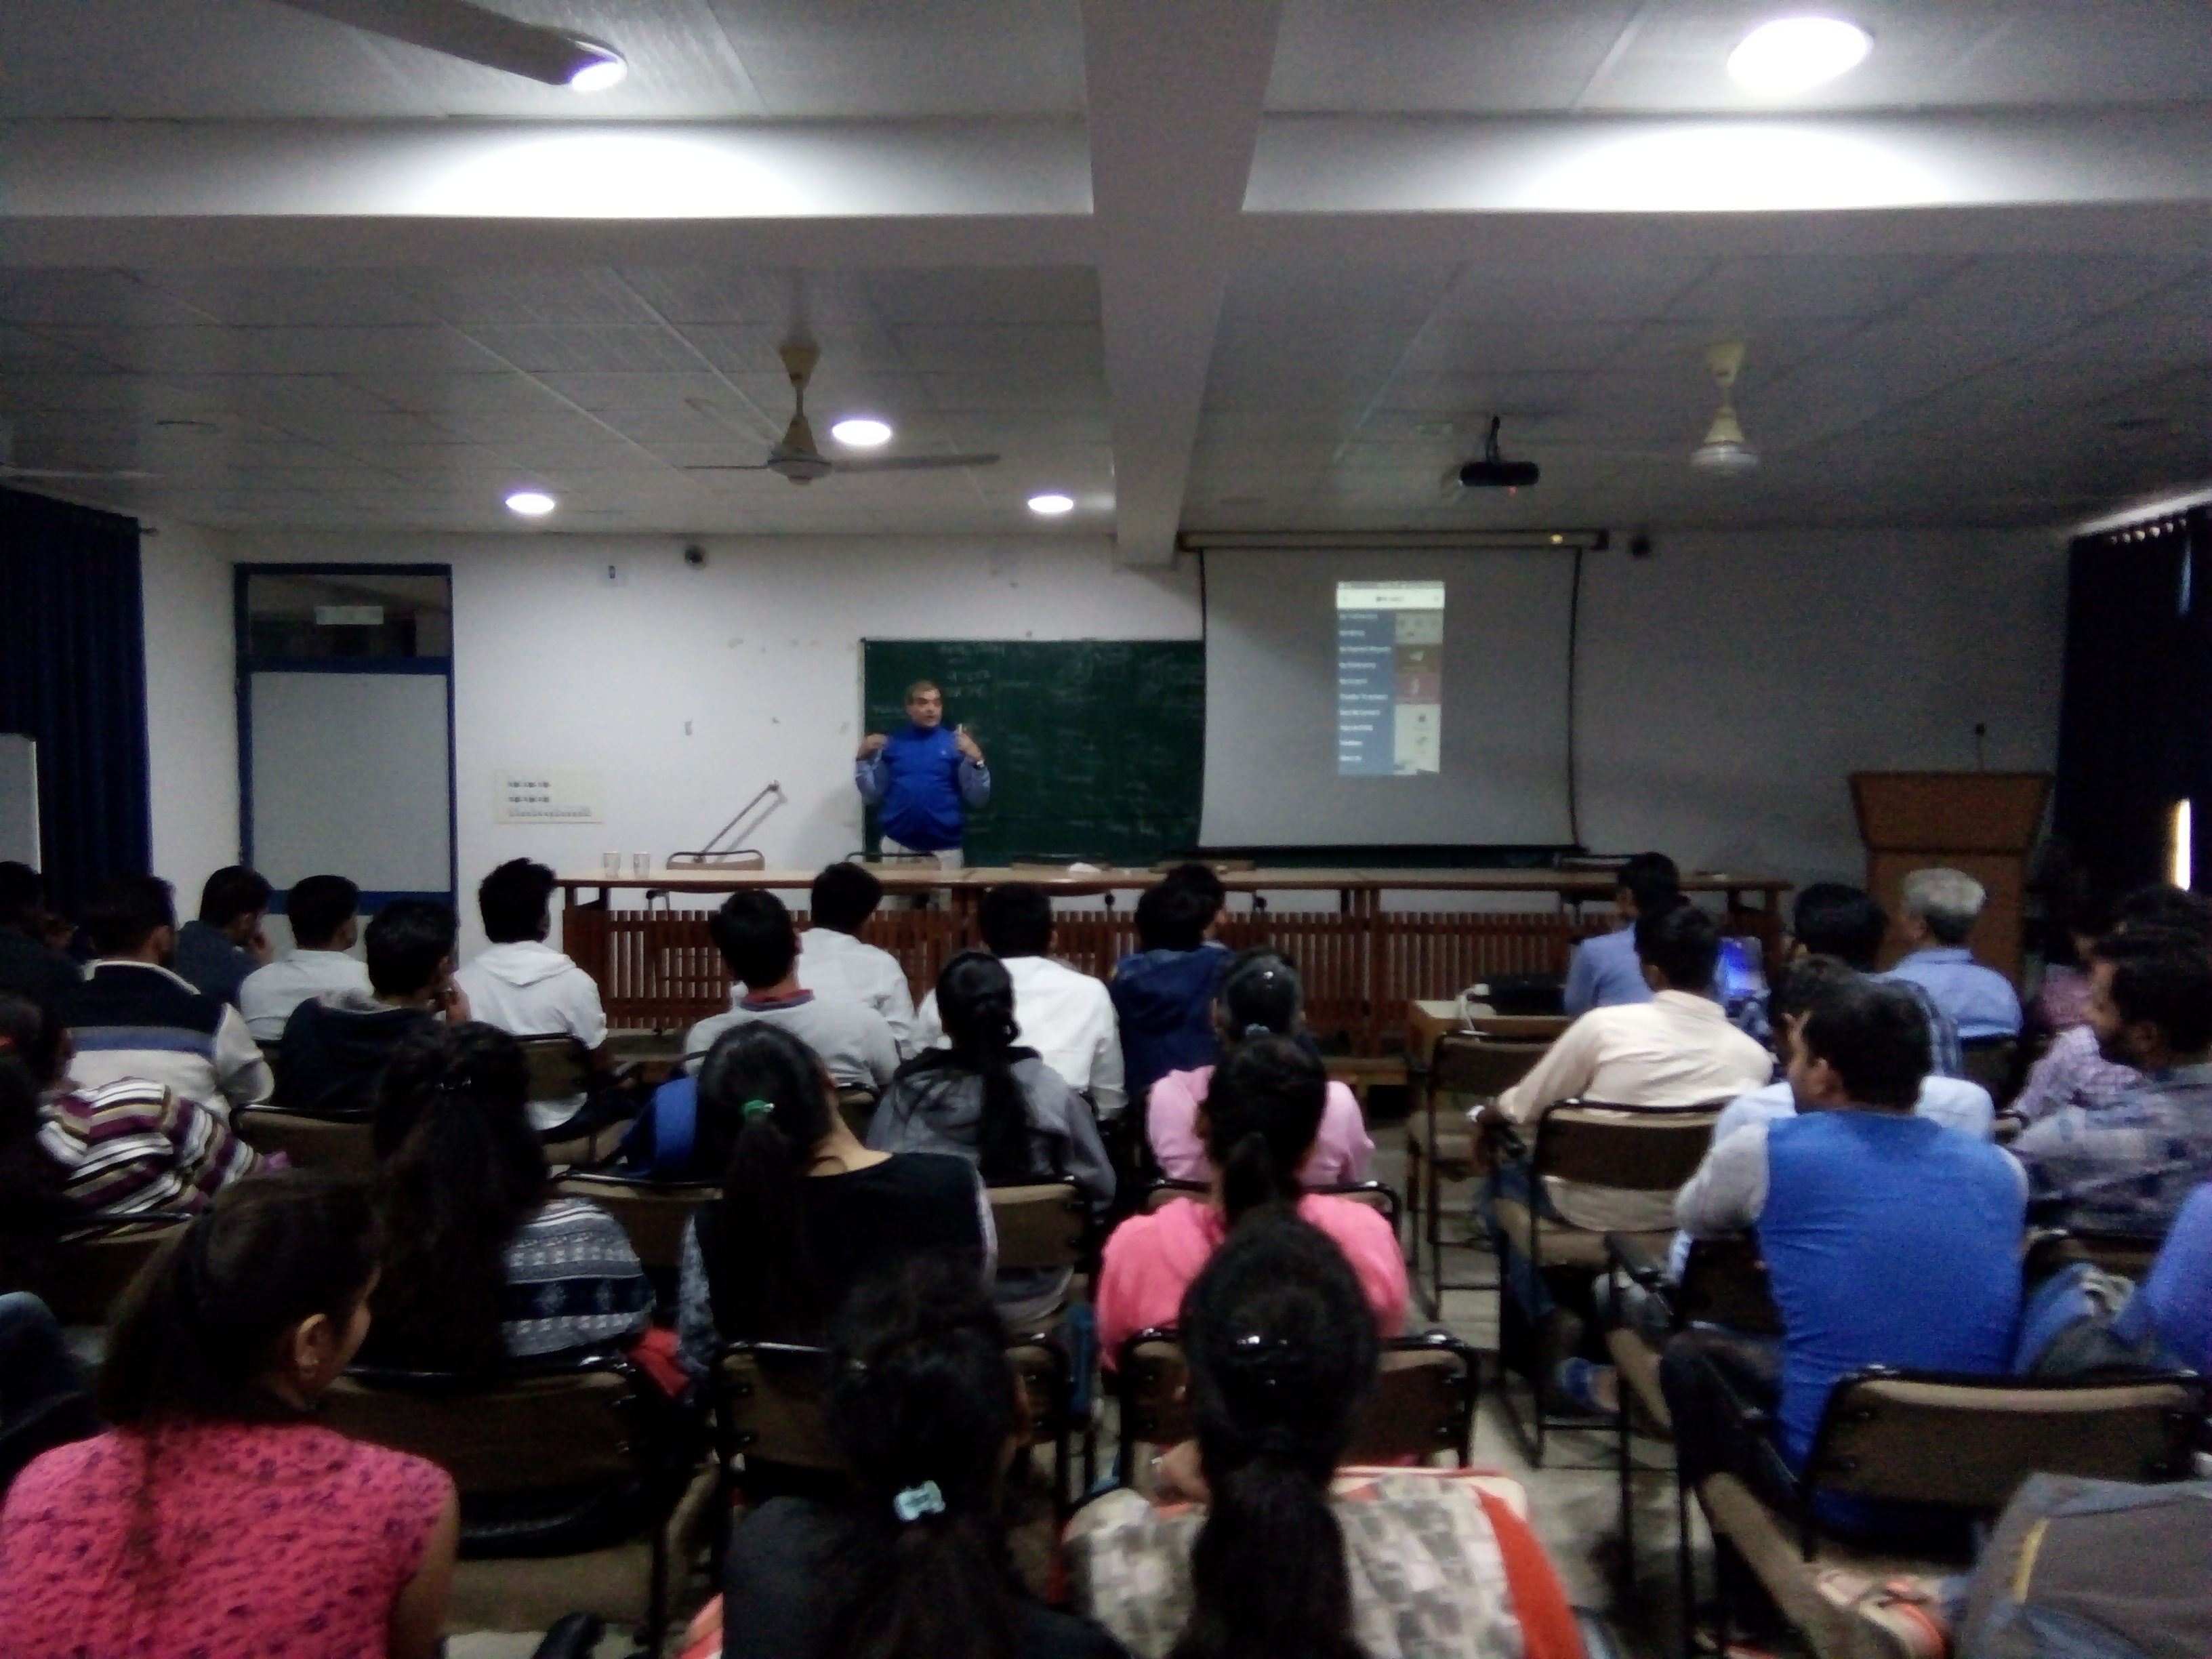 An Interactive Awareness Session on “DIGITAL BANKING & CASHLESS TRANSACTION”